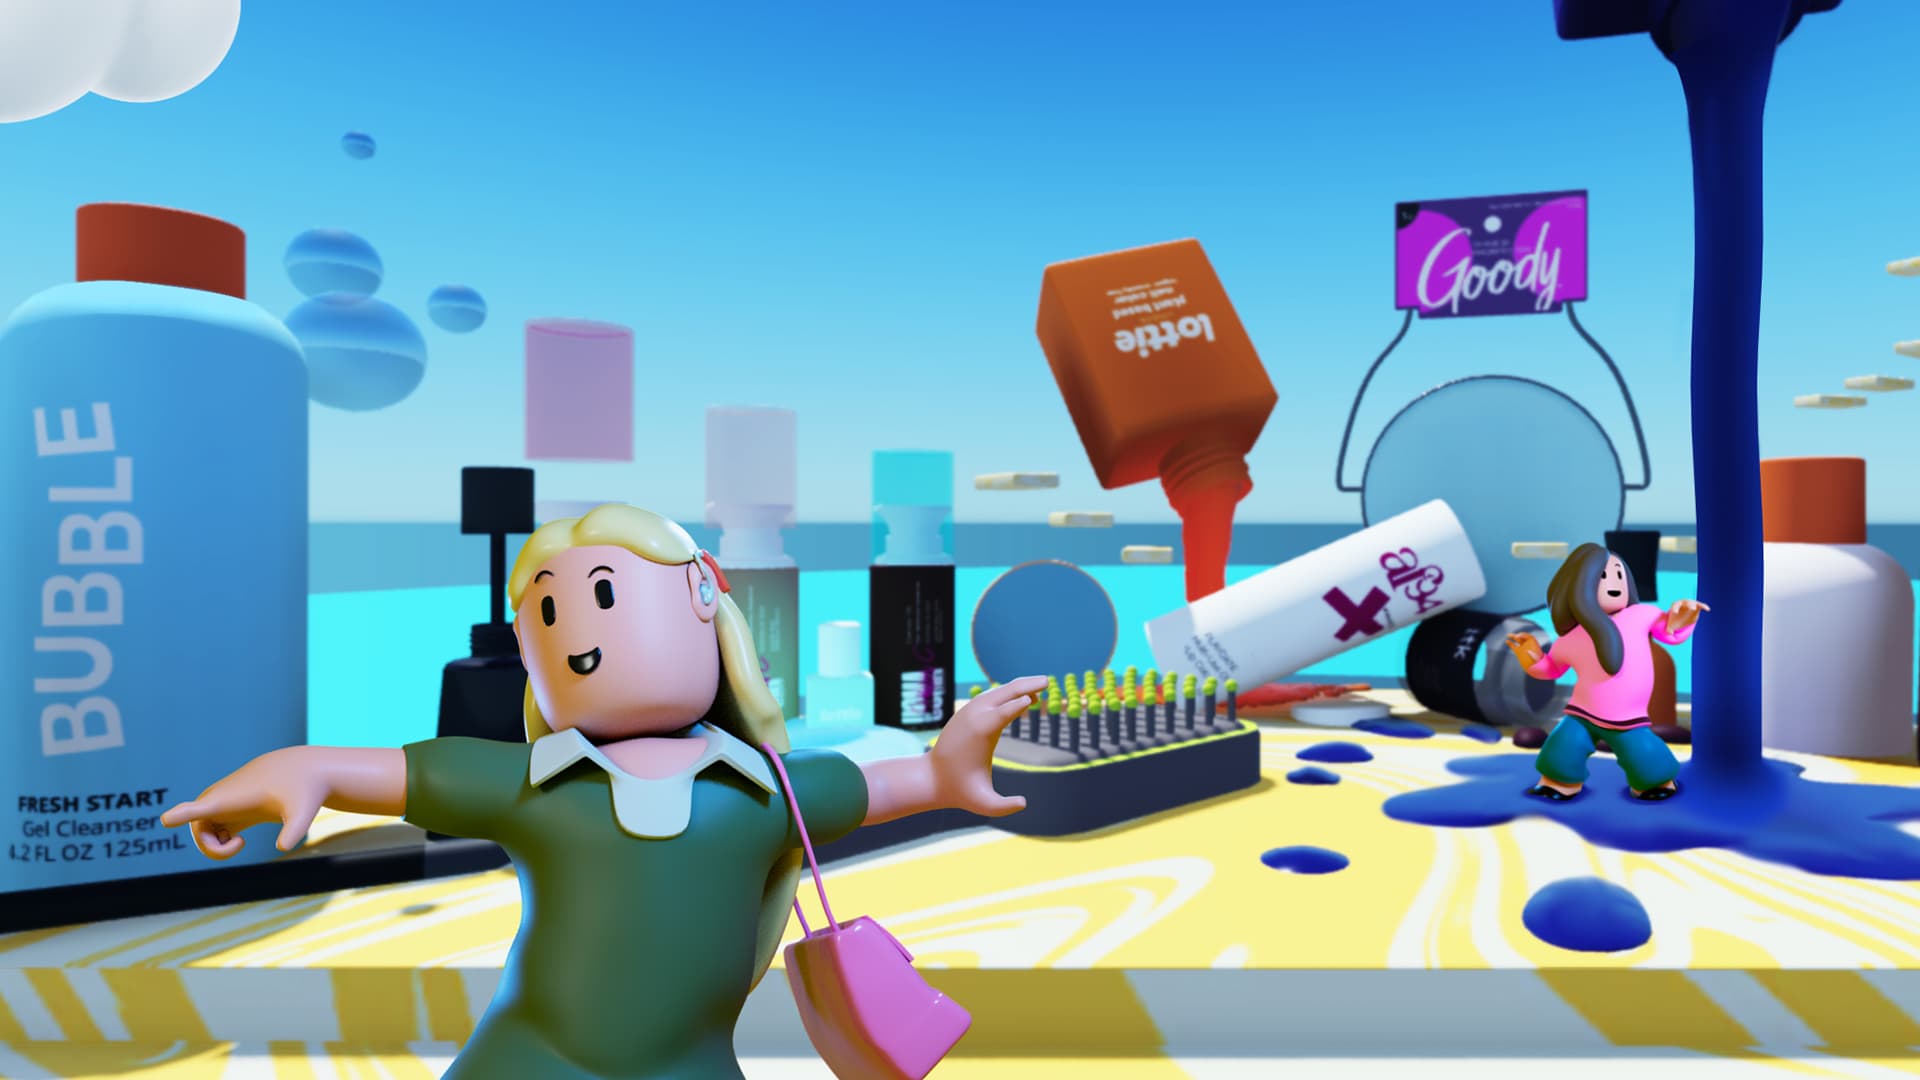 Walmart enters the metaverse with Roblox experiences aimed toward youthful customers